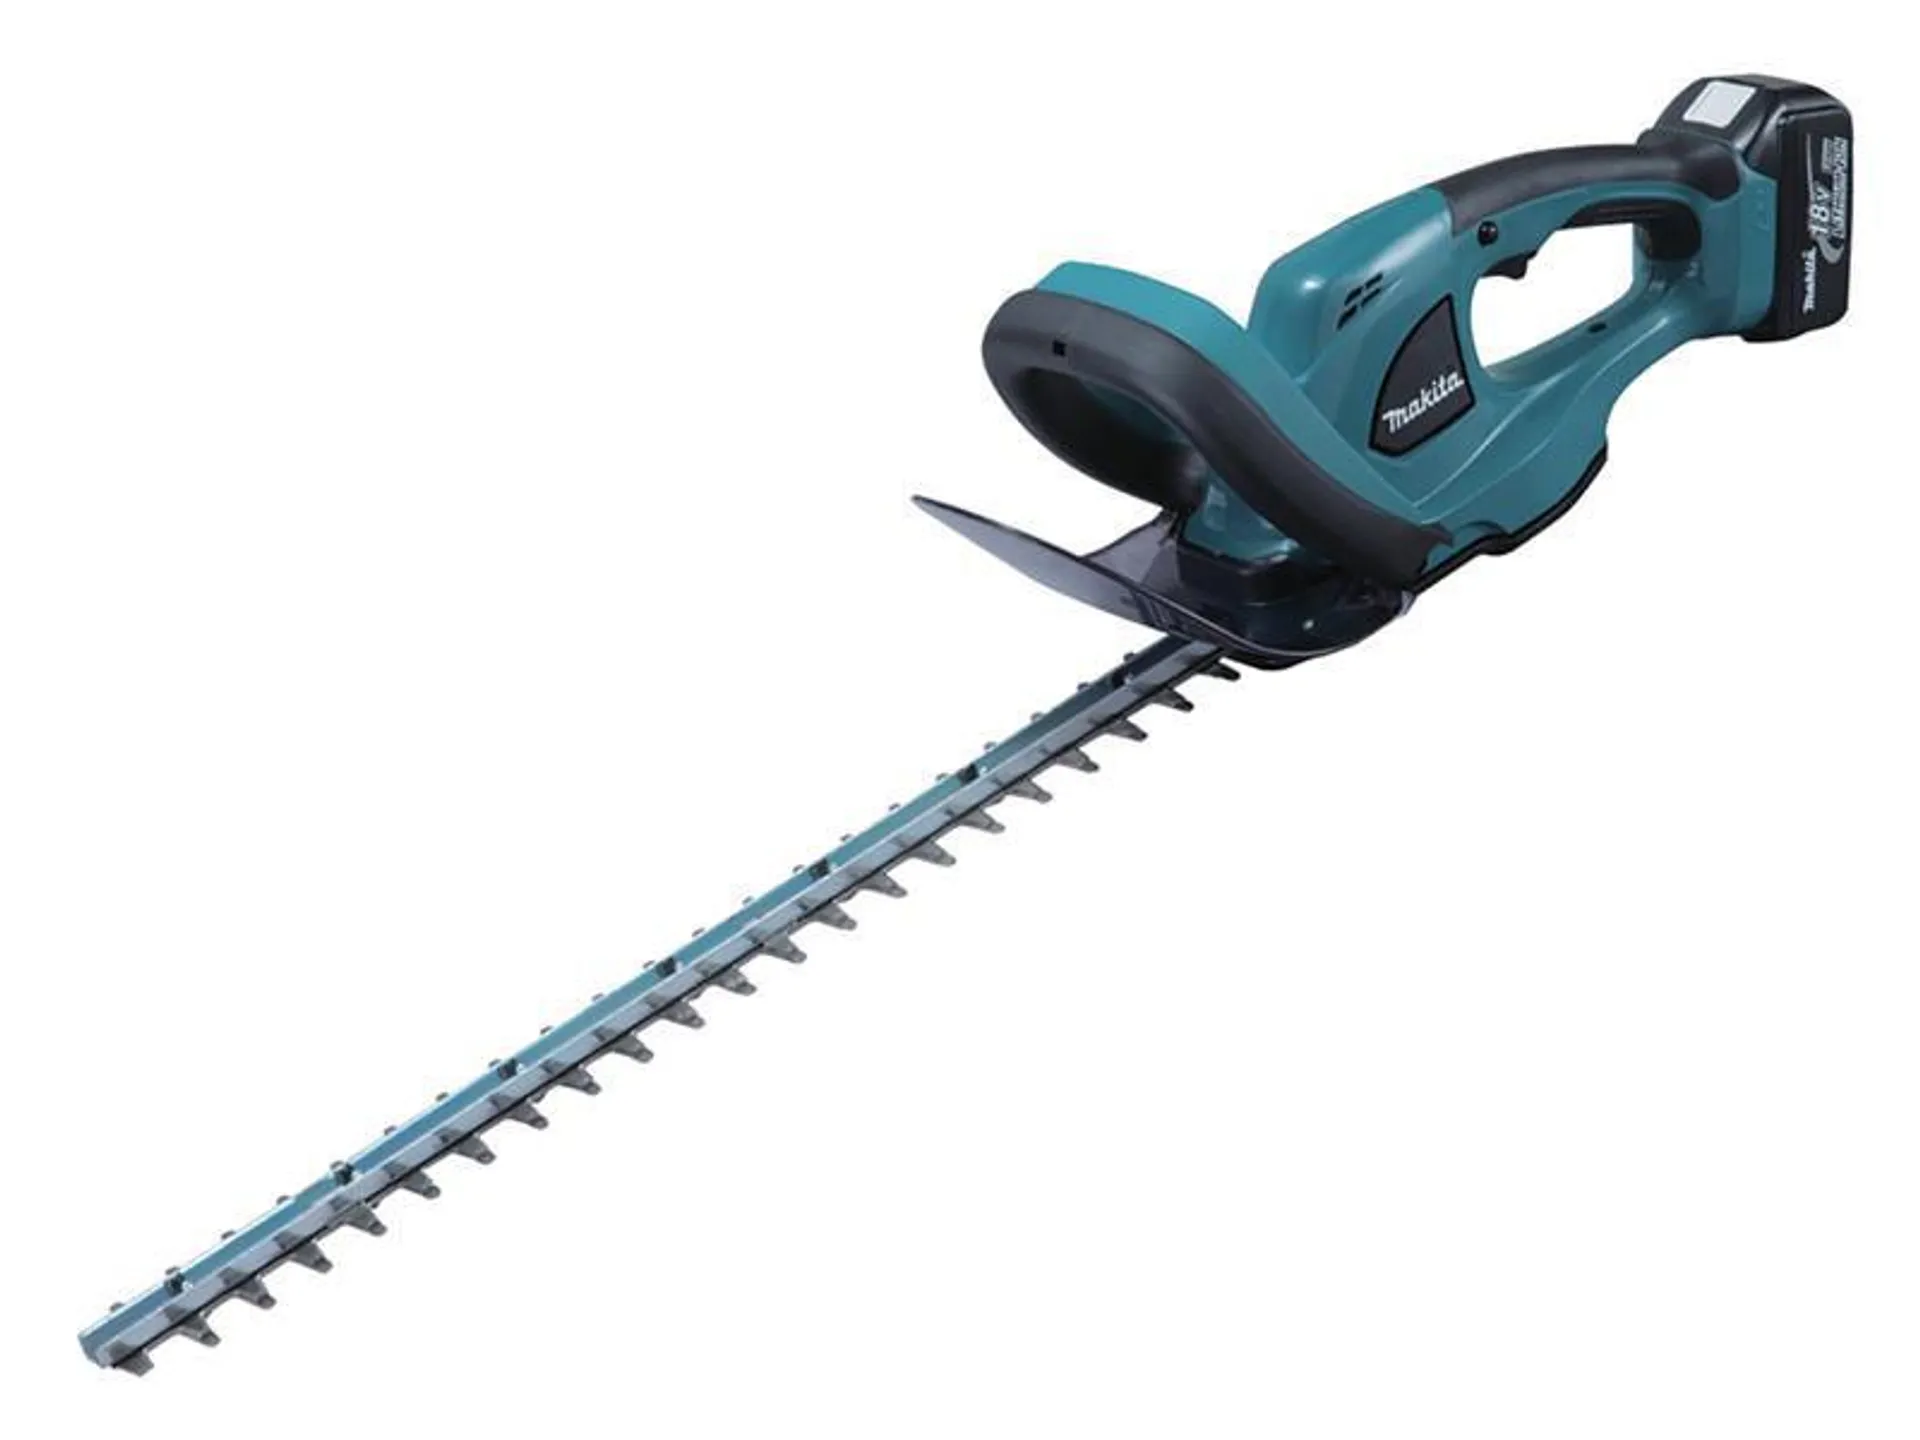 Makita 18V LXT 52cm Hedge Trimmer with 1x 5.0Ah Battery and Fast Charger